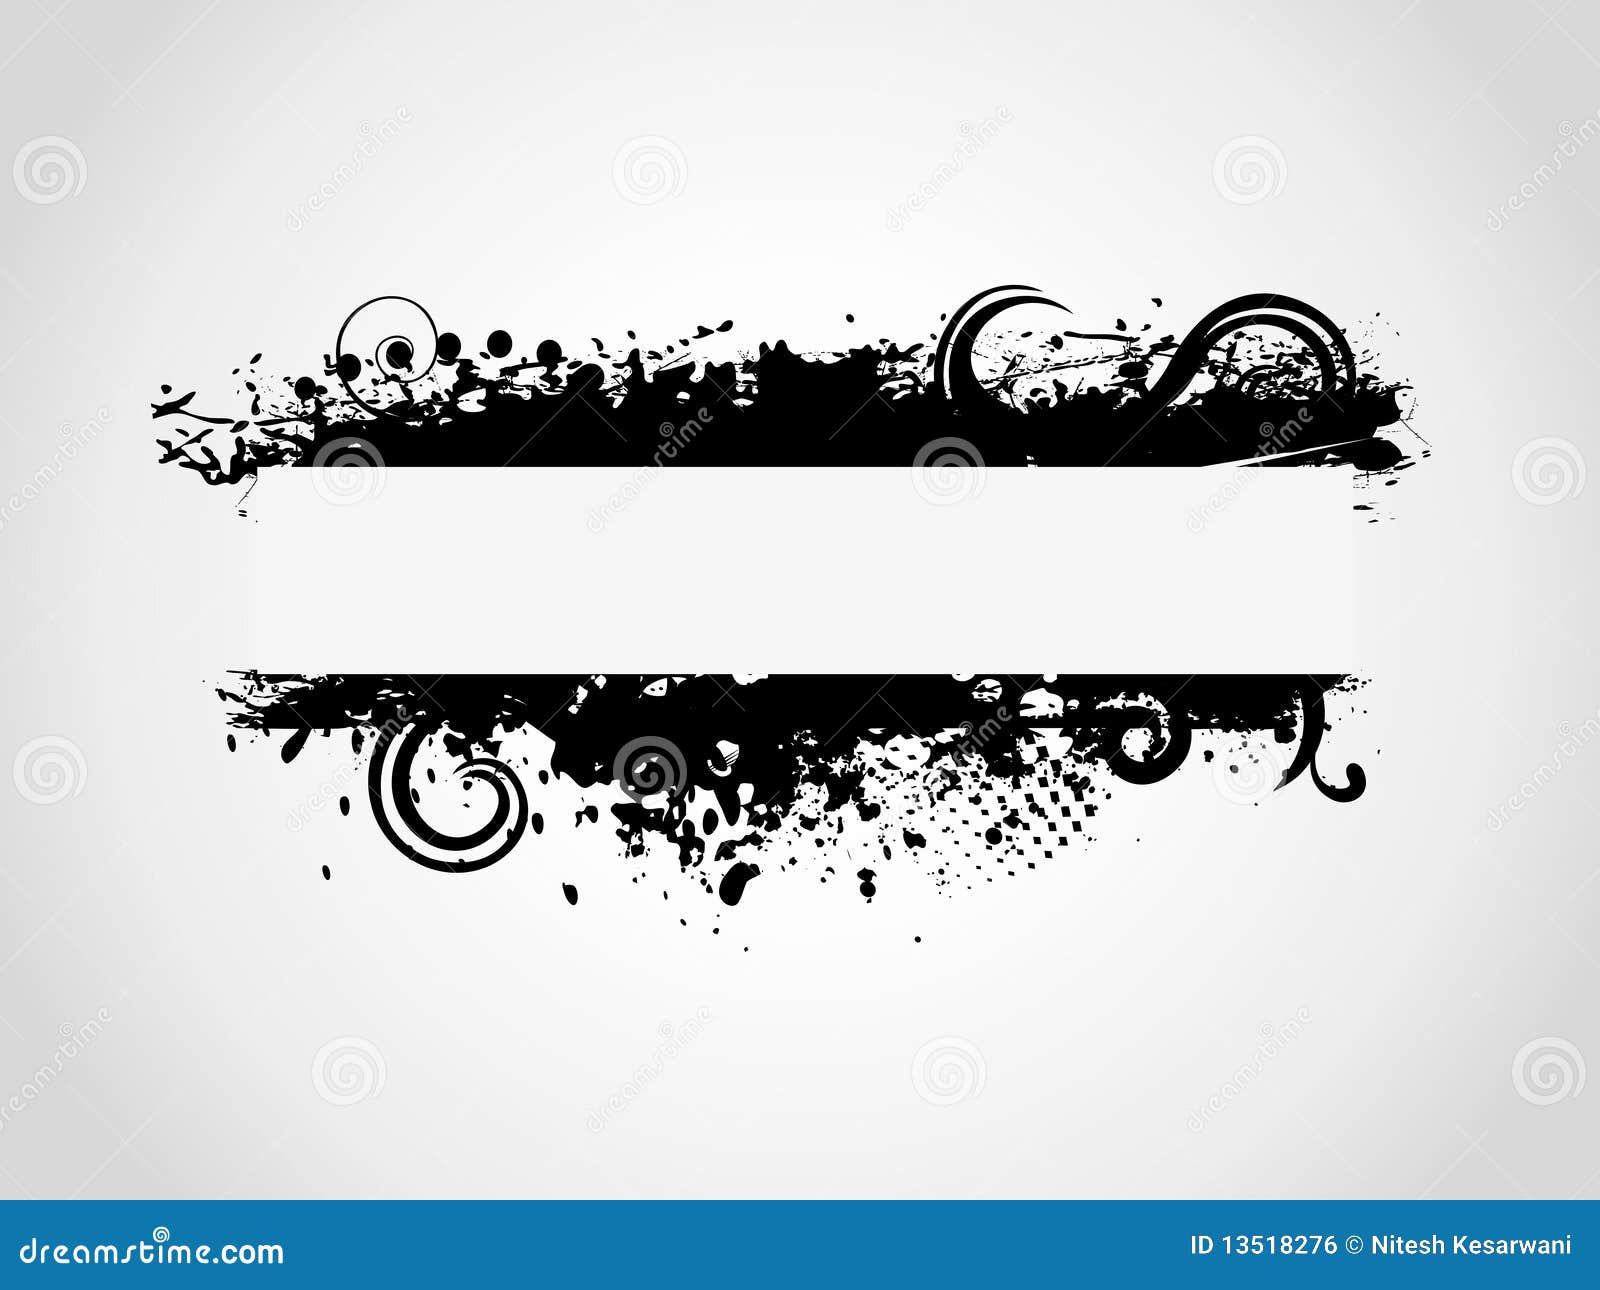 Banners Templates Vector Free